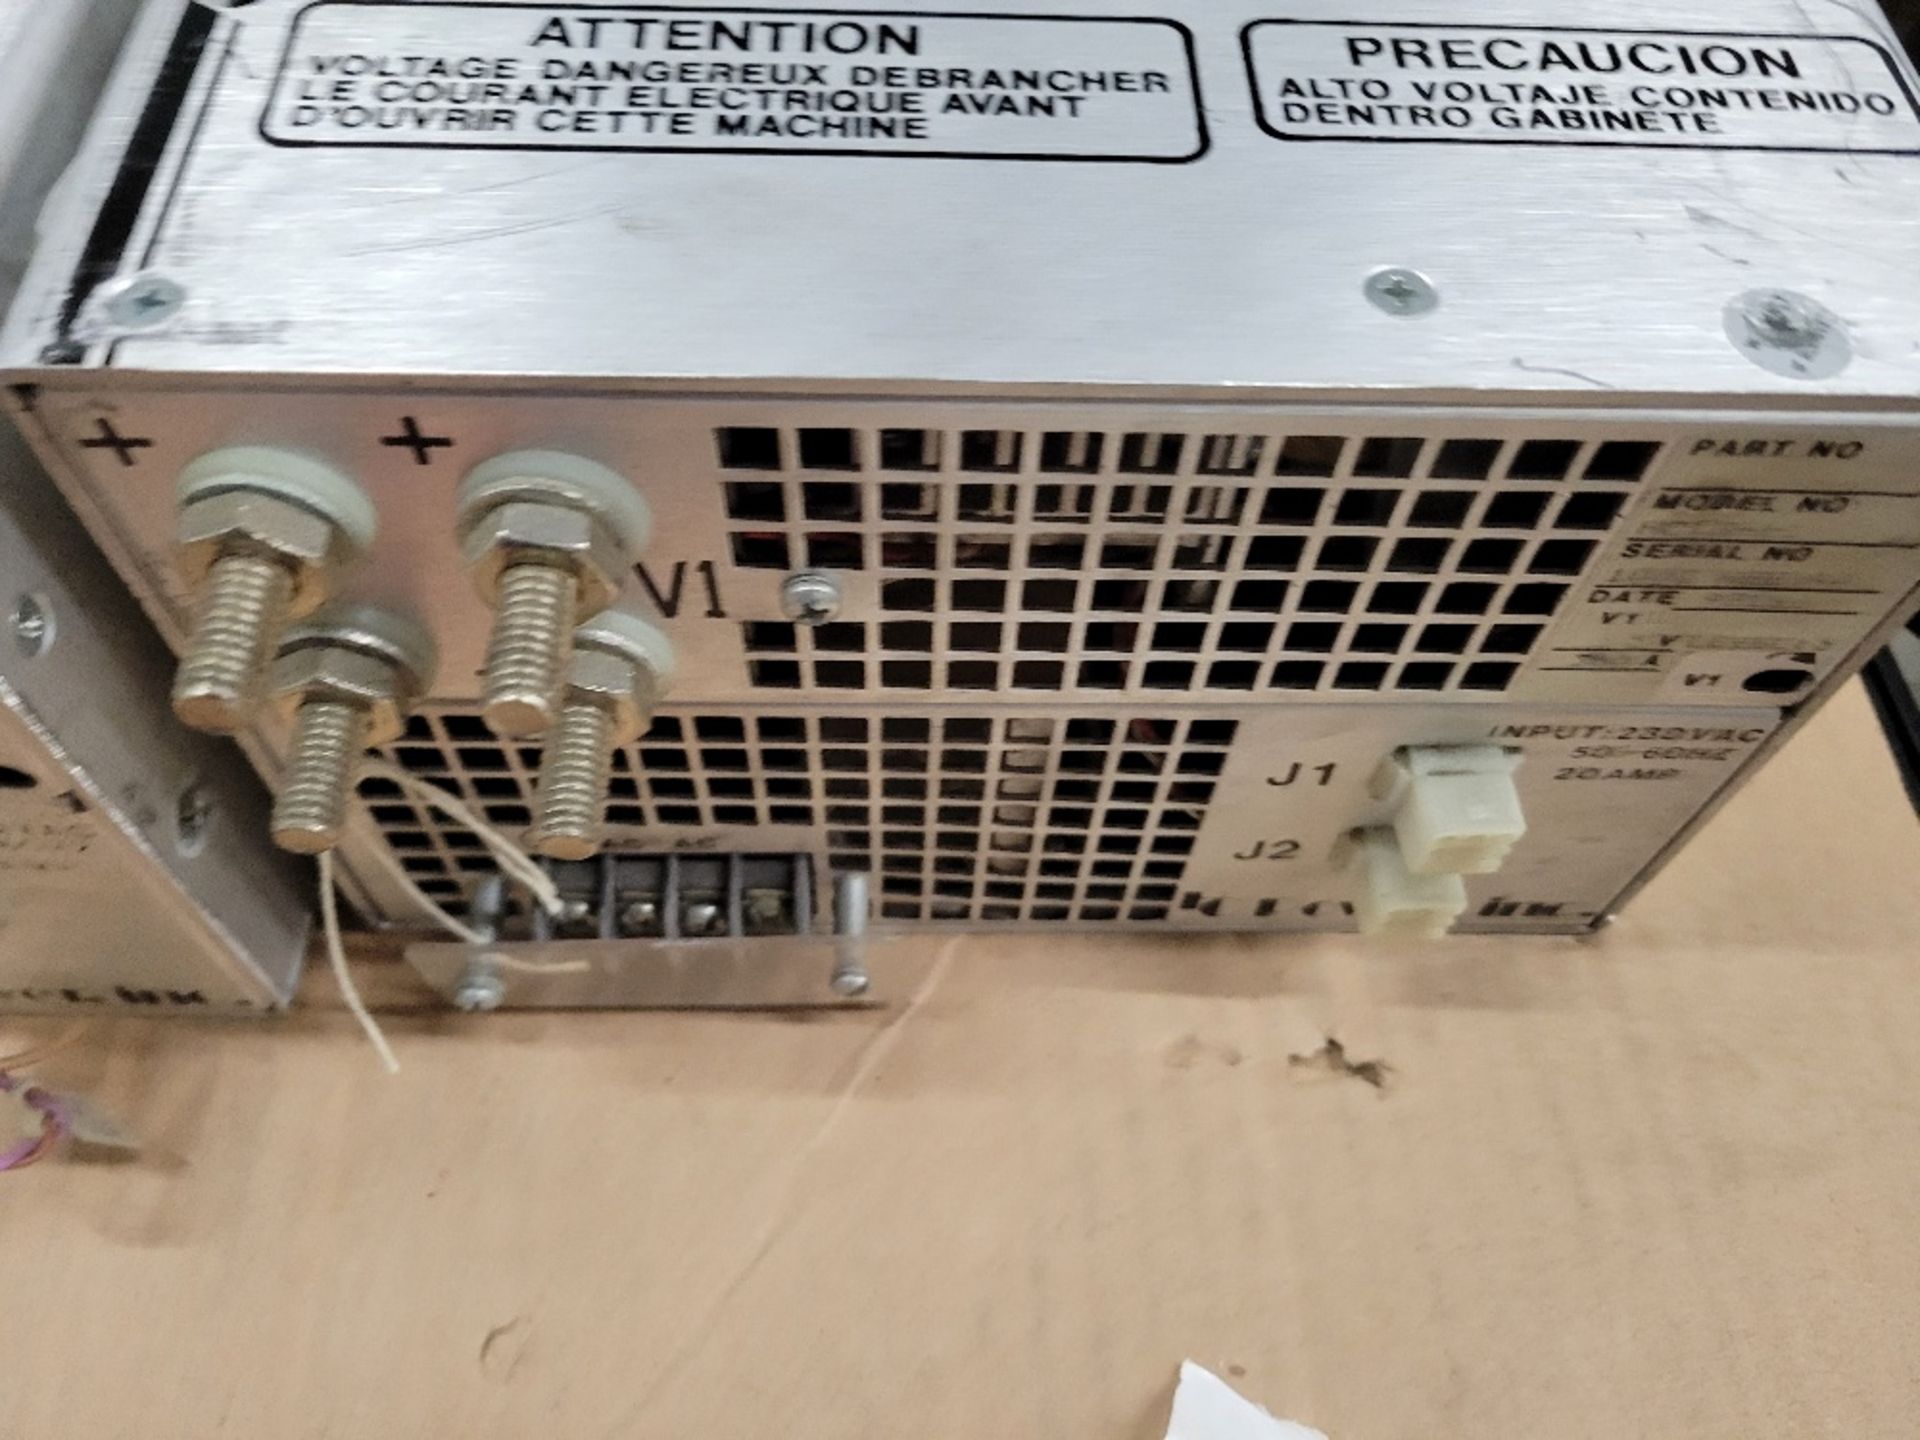 5x HC Power Used Surplus HC18-1 Other Power Supplies 20A:360A 230VAC:5V - Image 3 of 5